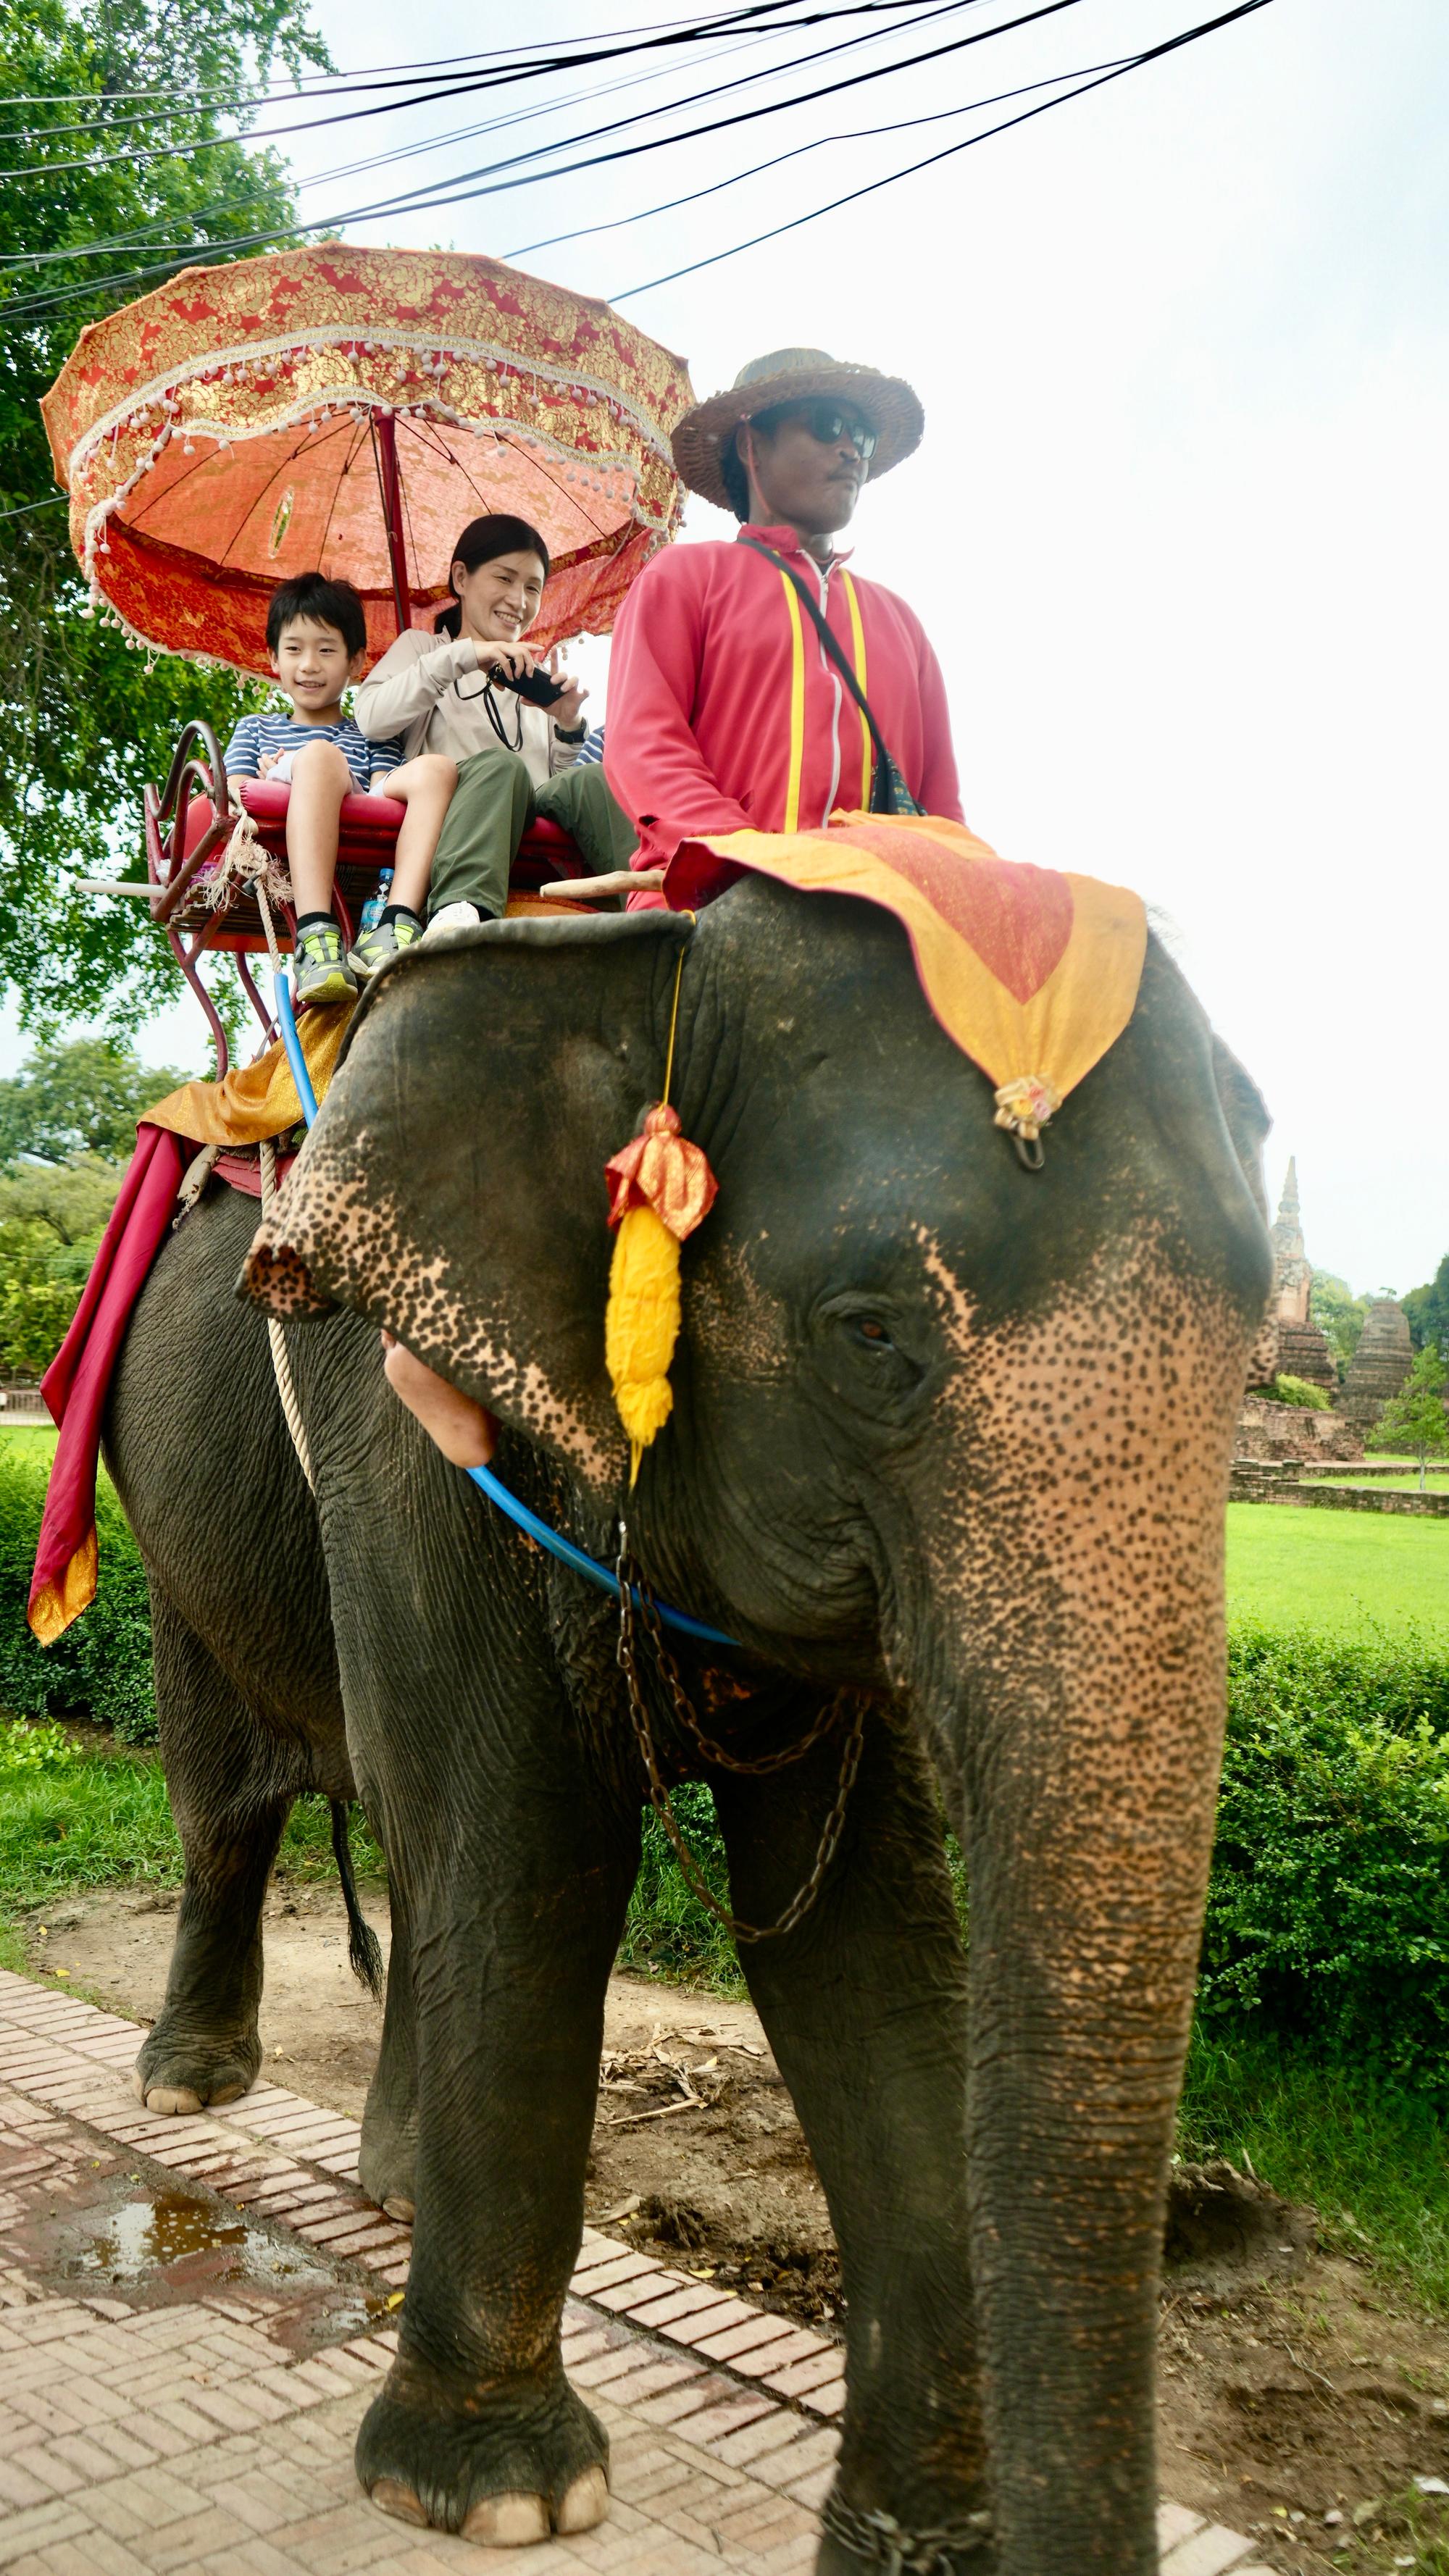 Elephants are used by Thais for many purposes